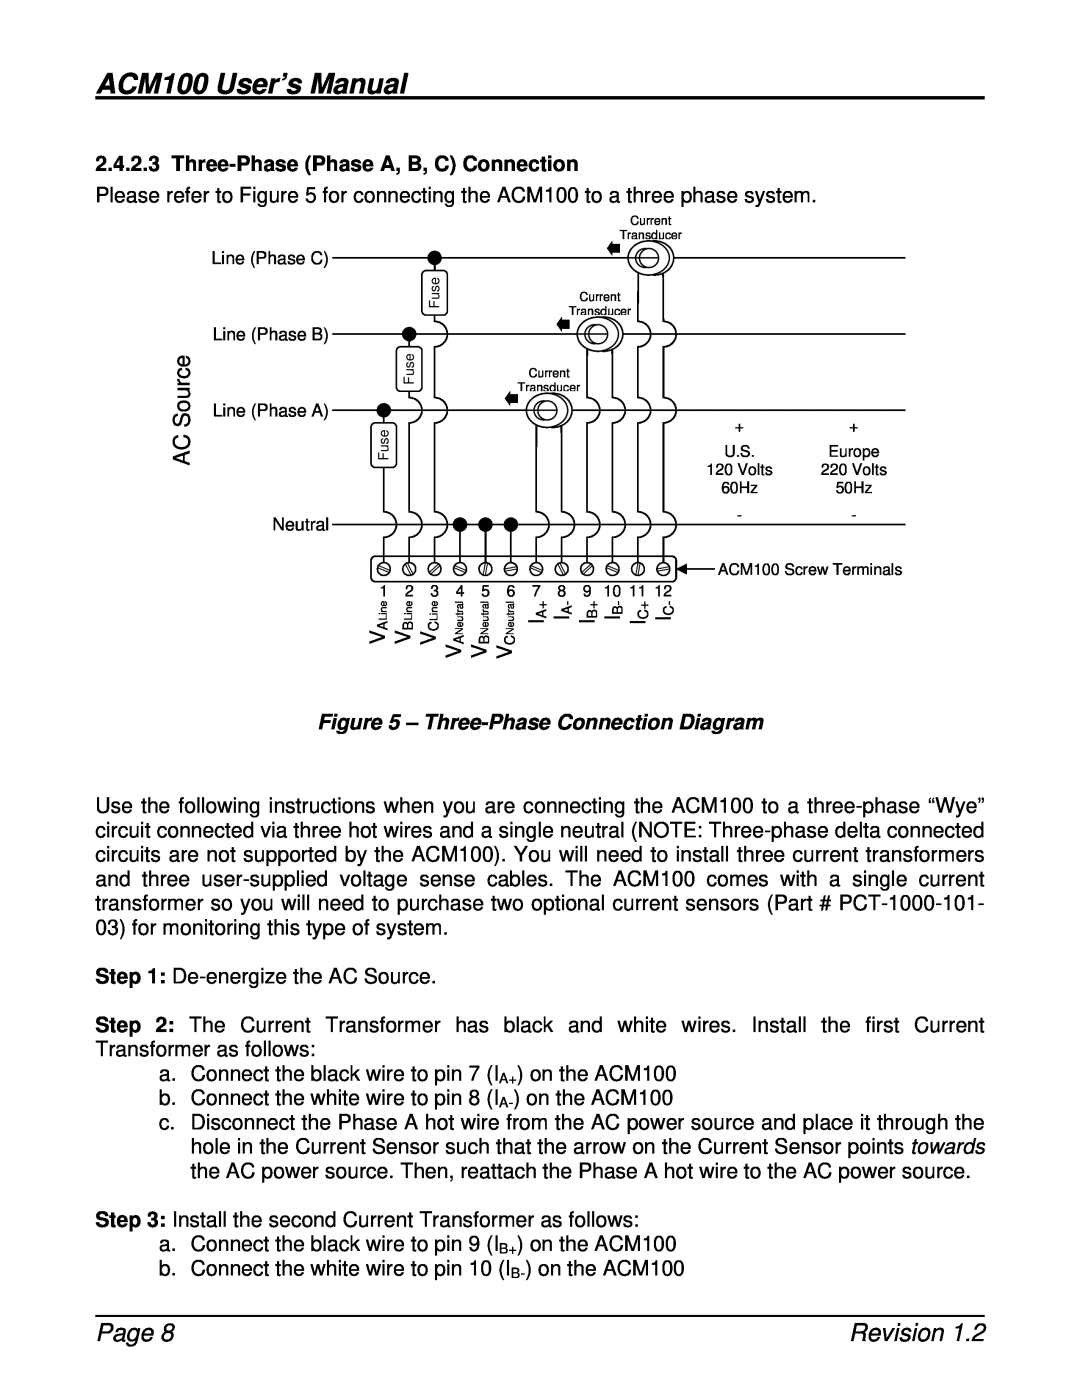 Maretron Three-Phase Phase A, B, C Connection, ACM100 User’s Manual, Page, Revision, Three-Phase Connection Diagram 